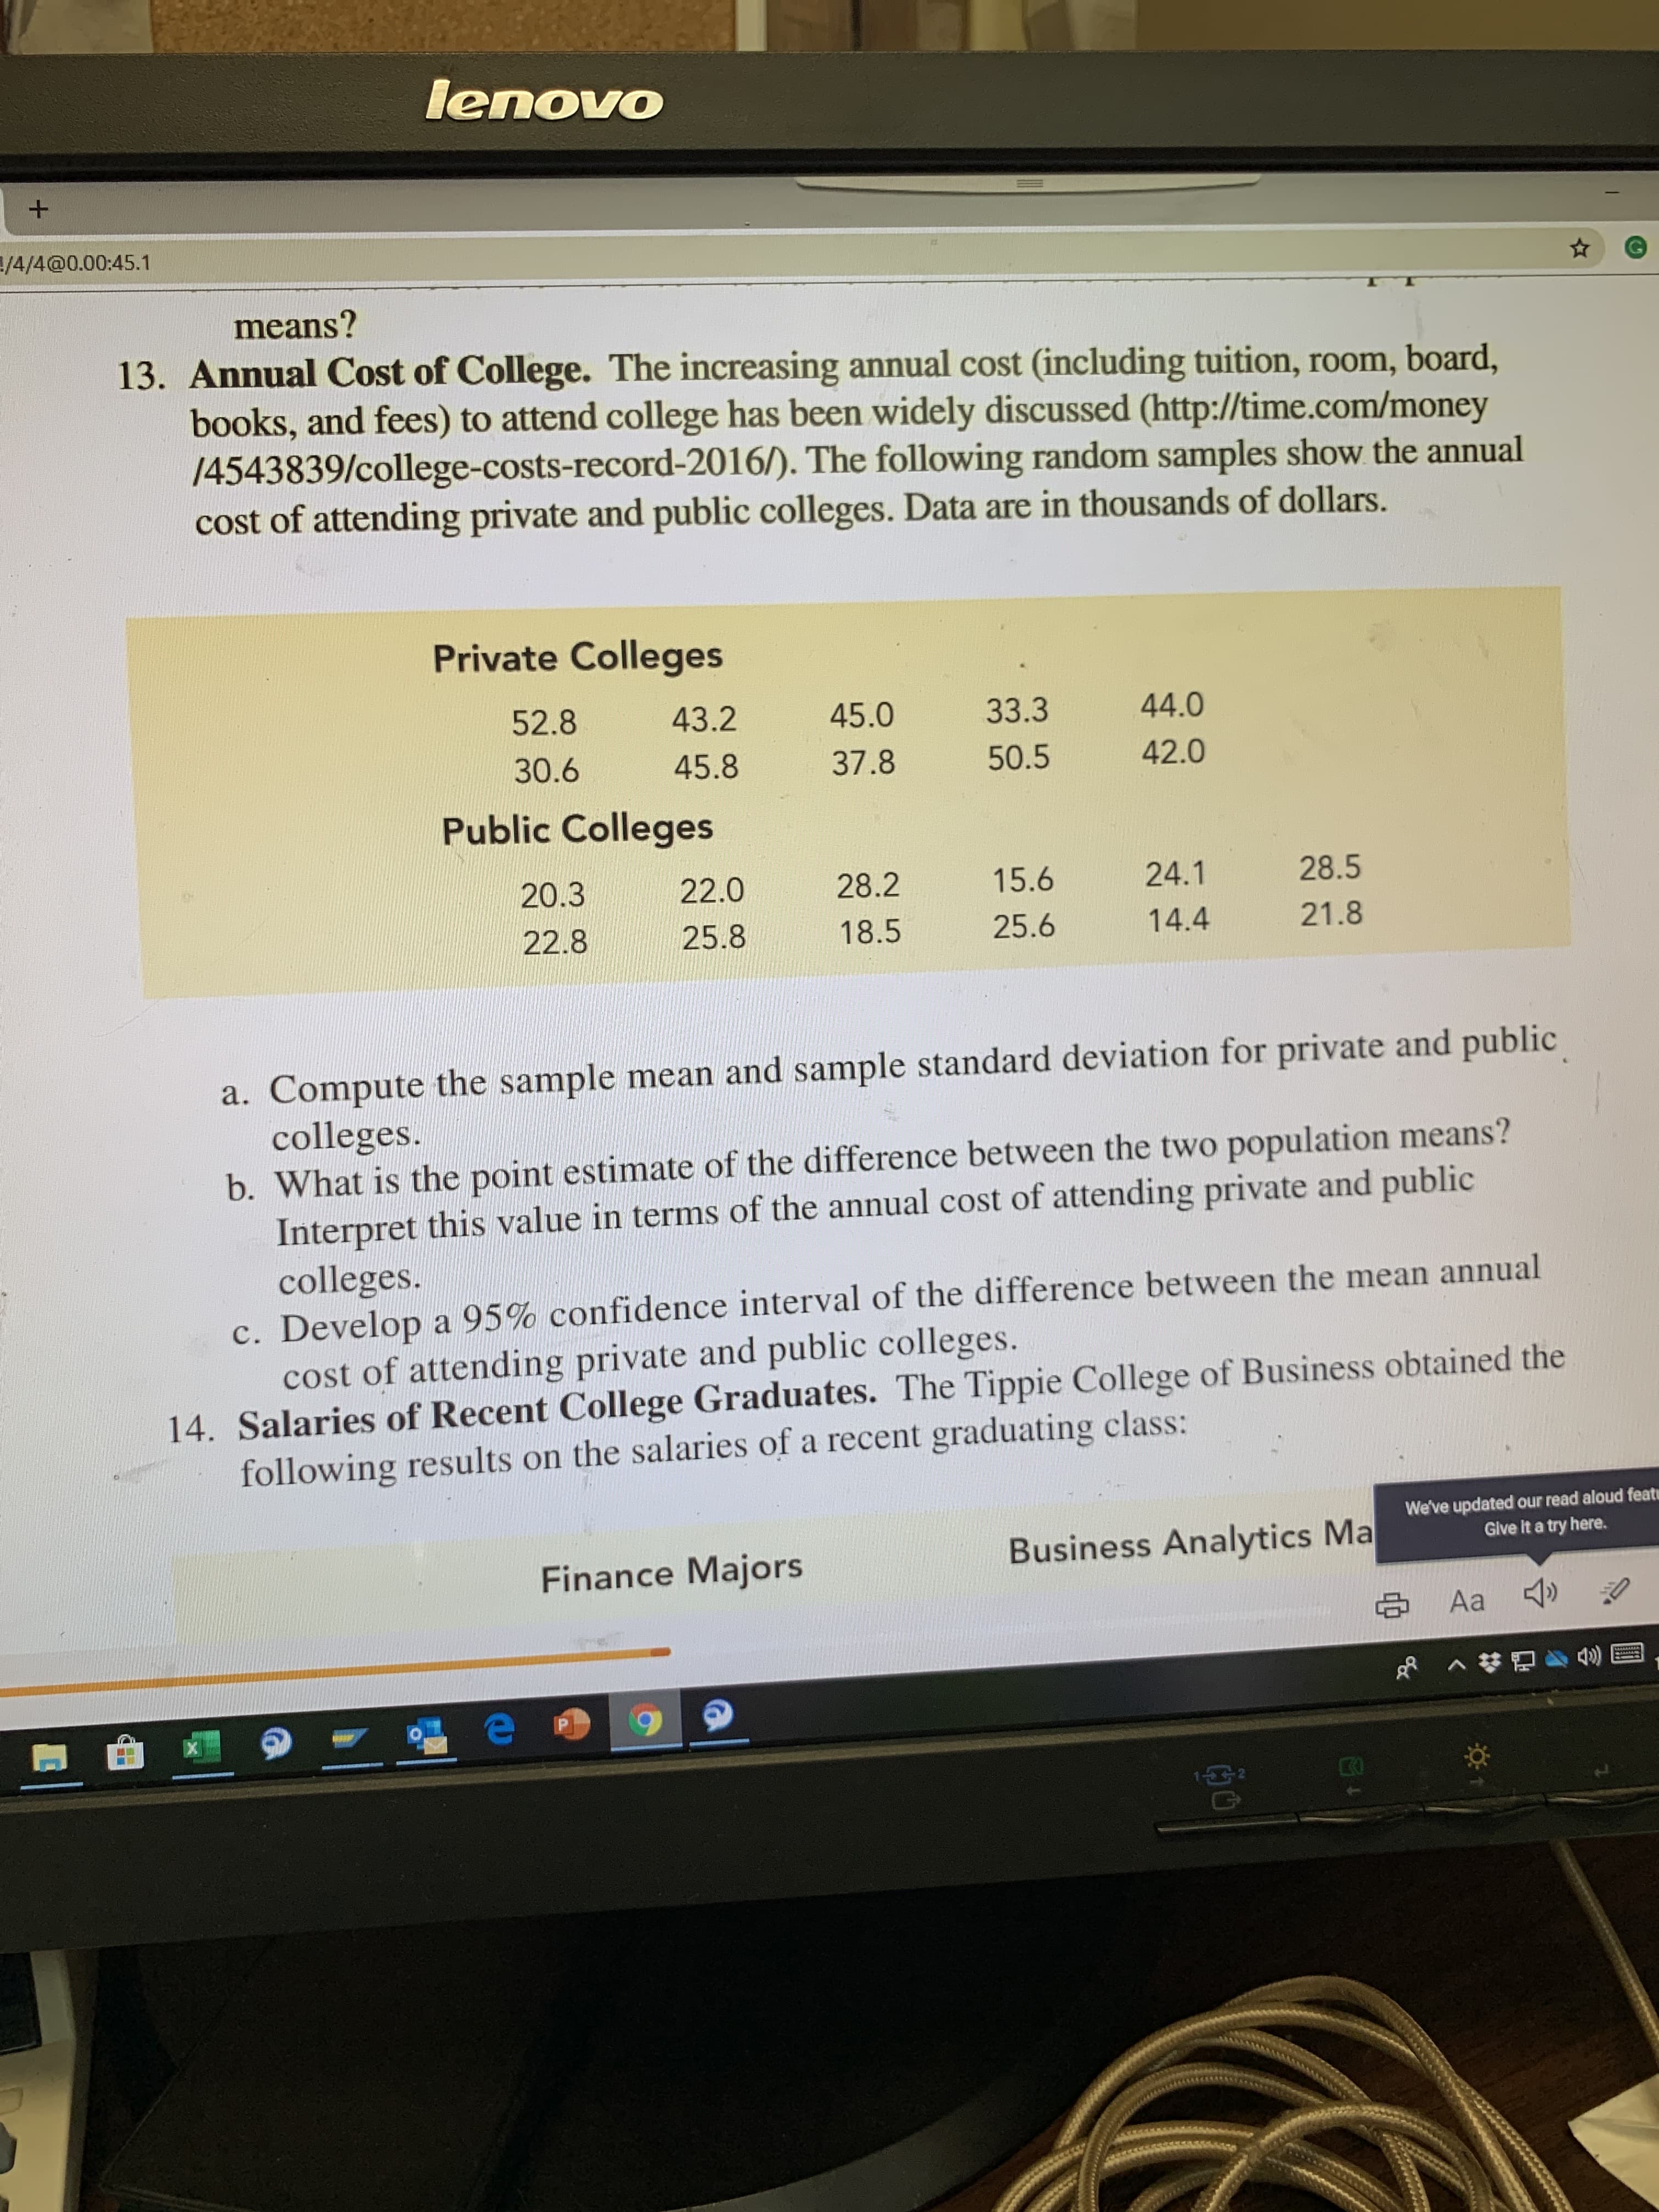 lenovo
/4/4@0.00:45.1
means?
13. Annual Cost of College. The increasing annual cost (including tuition, room, board,
books, and fees) to attend college has been widely discussed (http://time.com/money
/4543839/college-costs-record-2016/). The following random samples show the annual
cost of attending private and public colleges. Data are in thousands of dollars.
Private Colleges
43.2
44.0
52.8
33.3
45.0
42.0
30.6
45.8
37.8
50.5
Public Colleges
28.5
24.1
15.6
28.2
22.0
20.3
21.8
14.4
25.6
18.5
22.8
25.8
a. Compute the sample mean and sample standard deviation for private and public
colleges.
b. What is the point estimate of the difference between the two population means?
Interpret this value in terms of the annual cost of attending private and public
colleges.
c. Develop a 95% confidence interval of the difference between the mean annual
cost of attending private and public colleges.
14. Salaries of Recent College Graduates. The Tippie College of Business obtained the
following results on the salaries of a recent graduating class:
We've updated our read aloud feat
Give It a try here.
Business Analytics Ma
Finance Majors
SAa
GP
